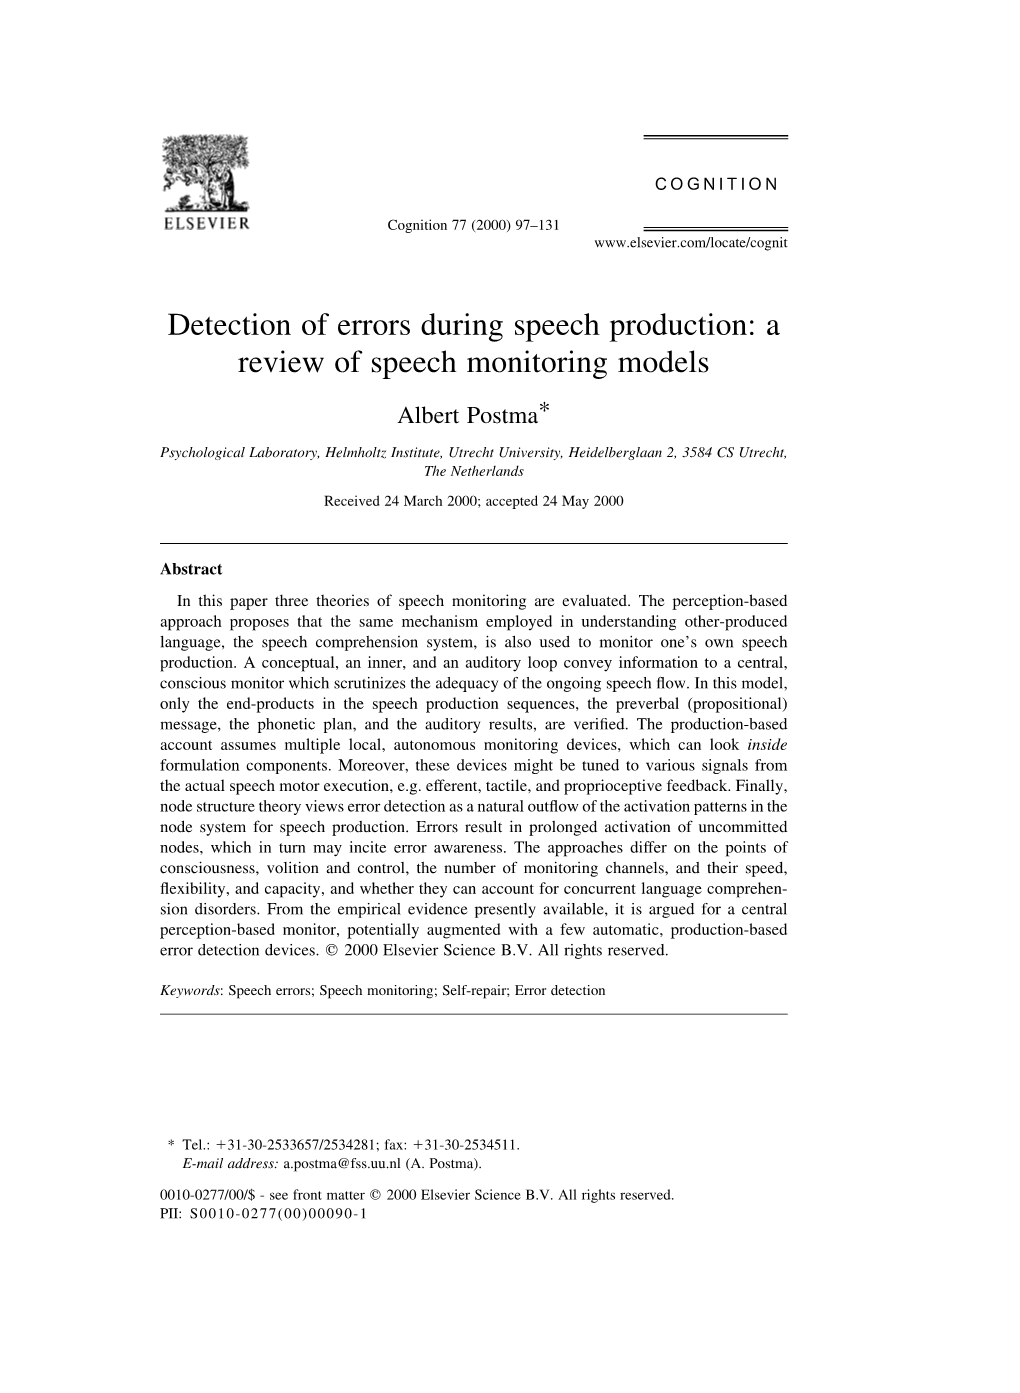 Detection of Errors During Speech Production: a Review of Speech Monitoring Models